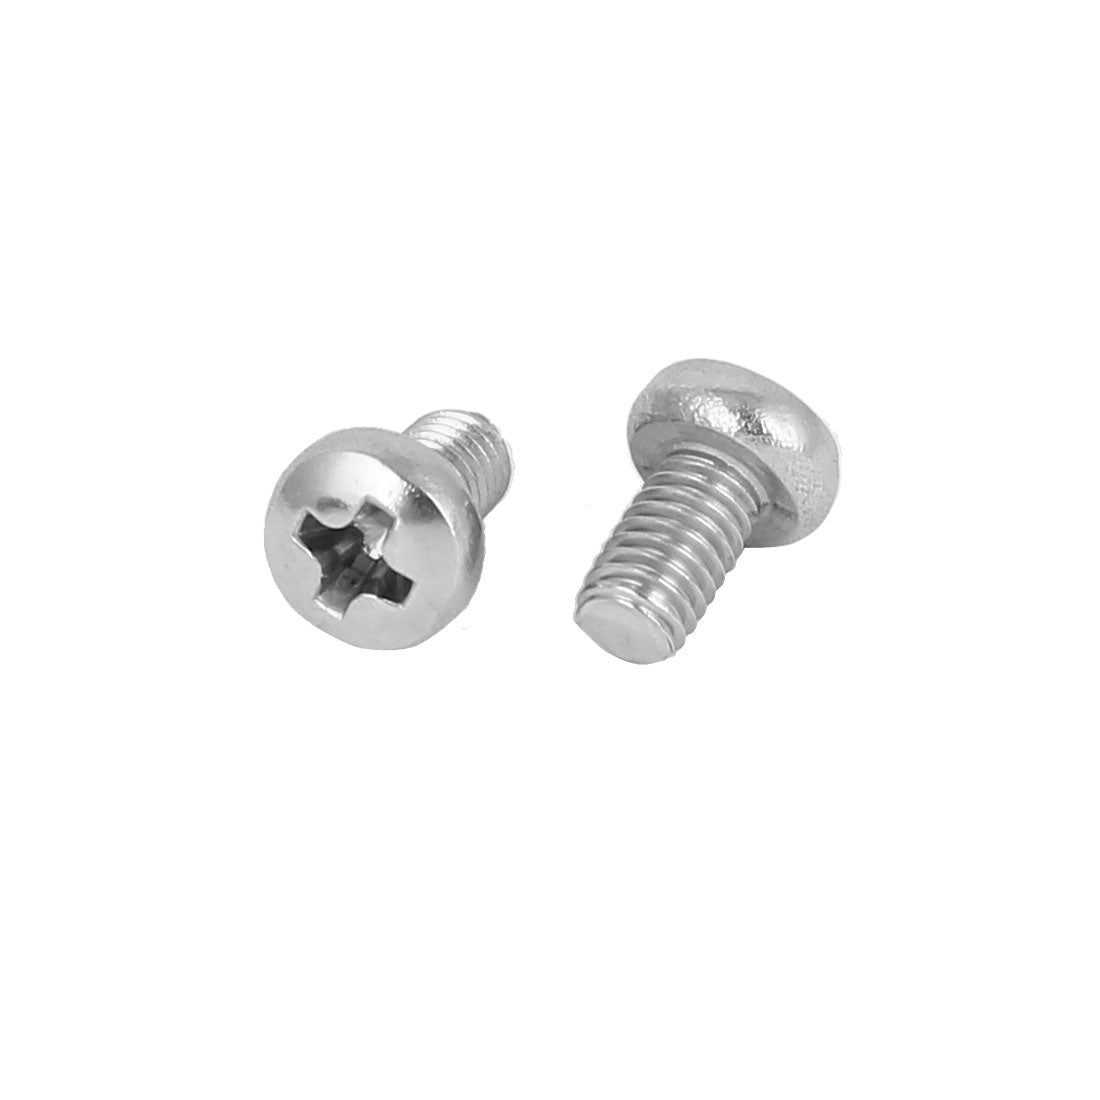 uxcell Uxcell 50 Pcs M3x5mm 316 Stainless Steel Phillips Pan Head Machine Screws Fasteners